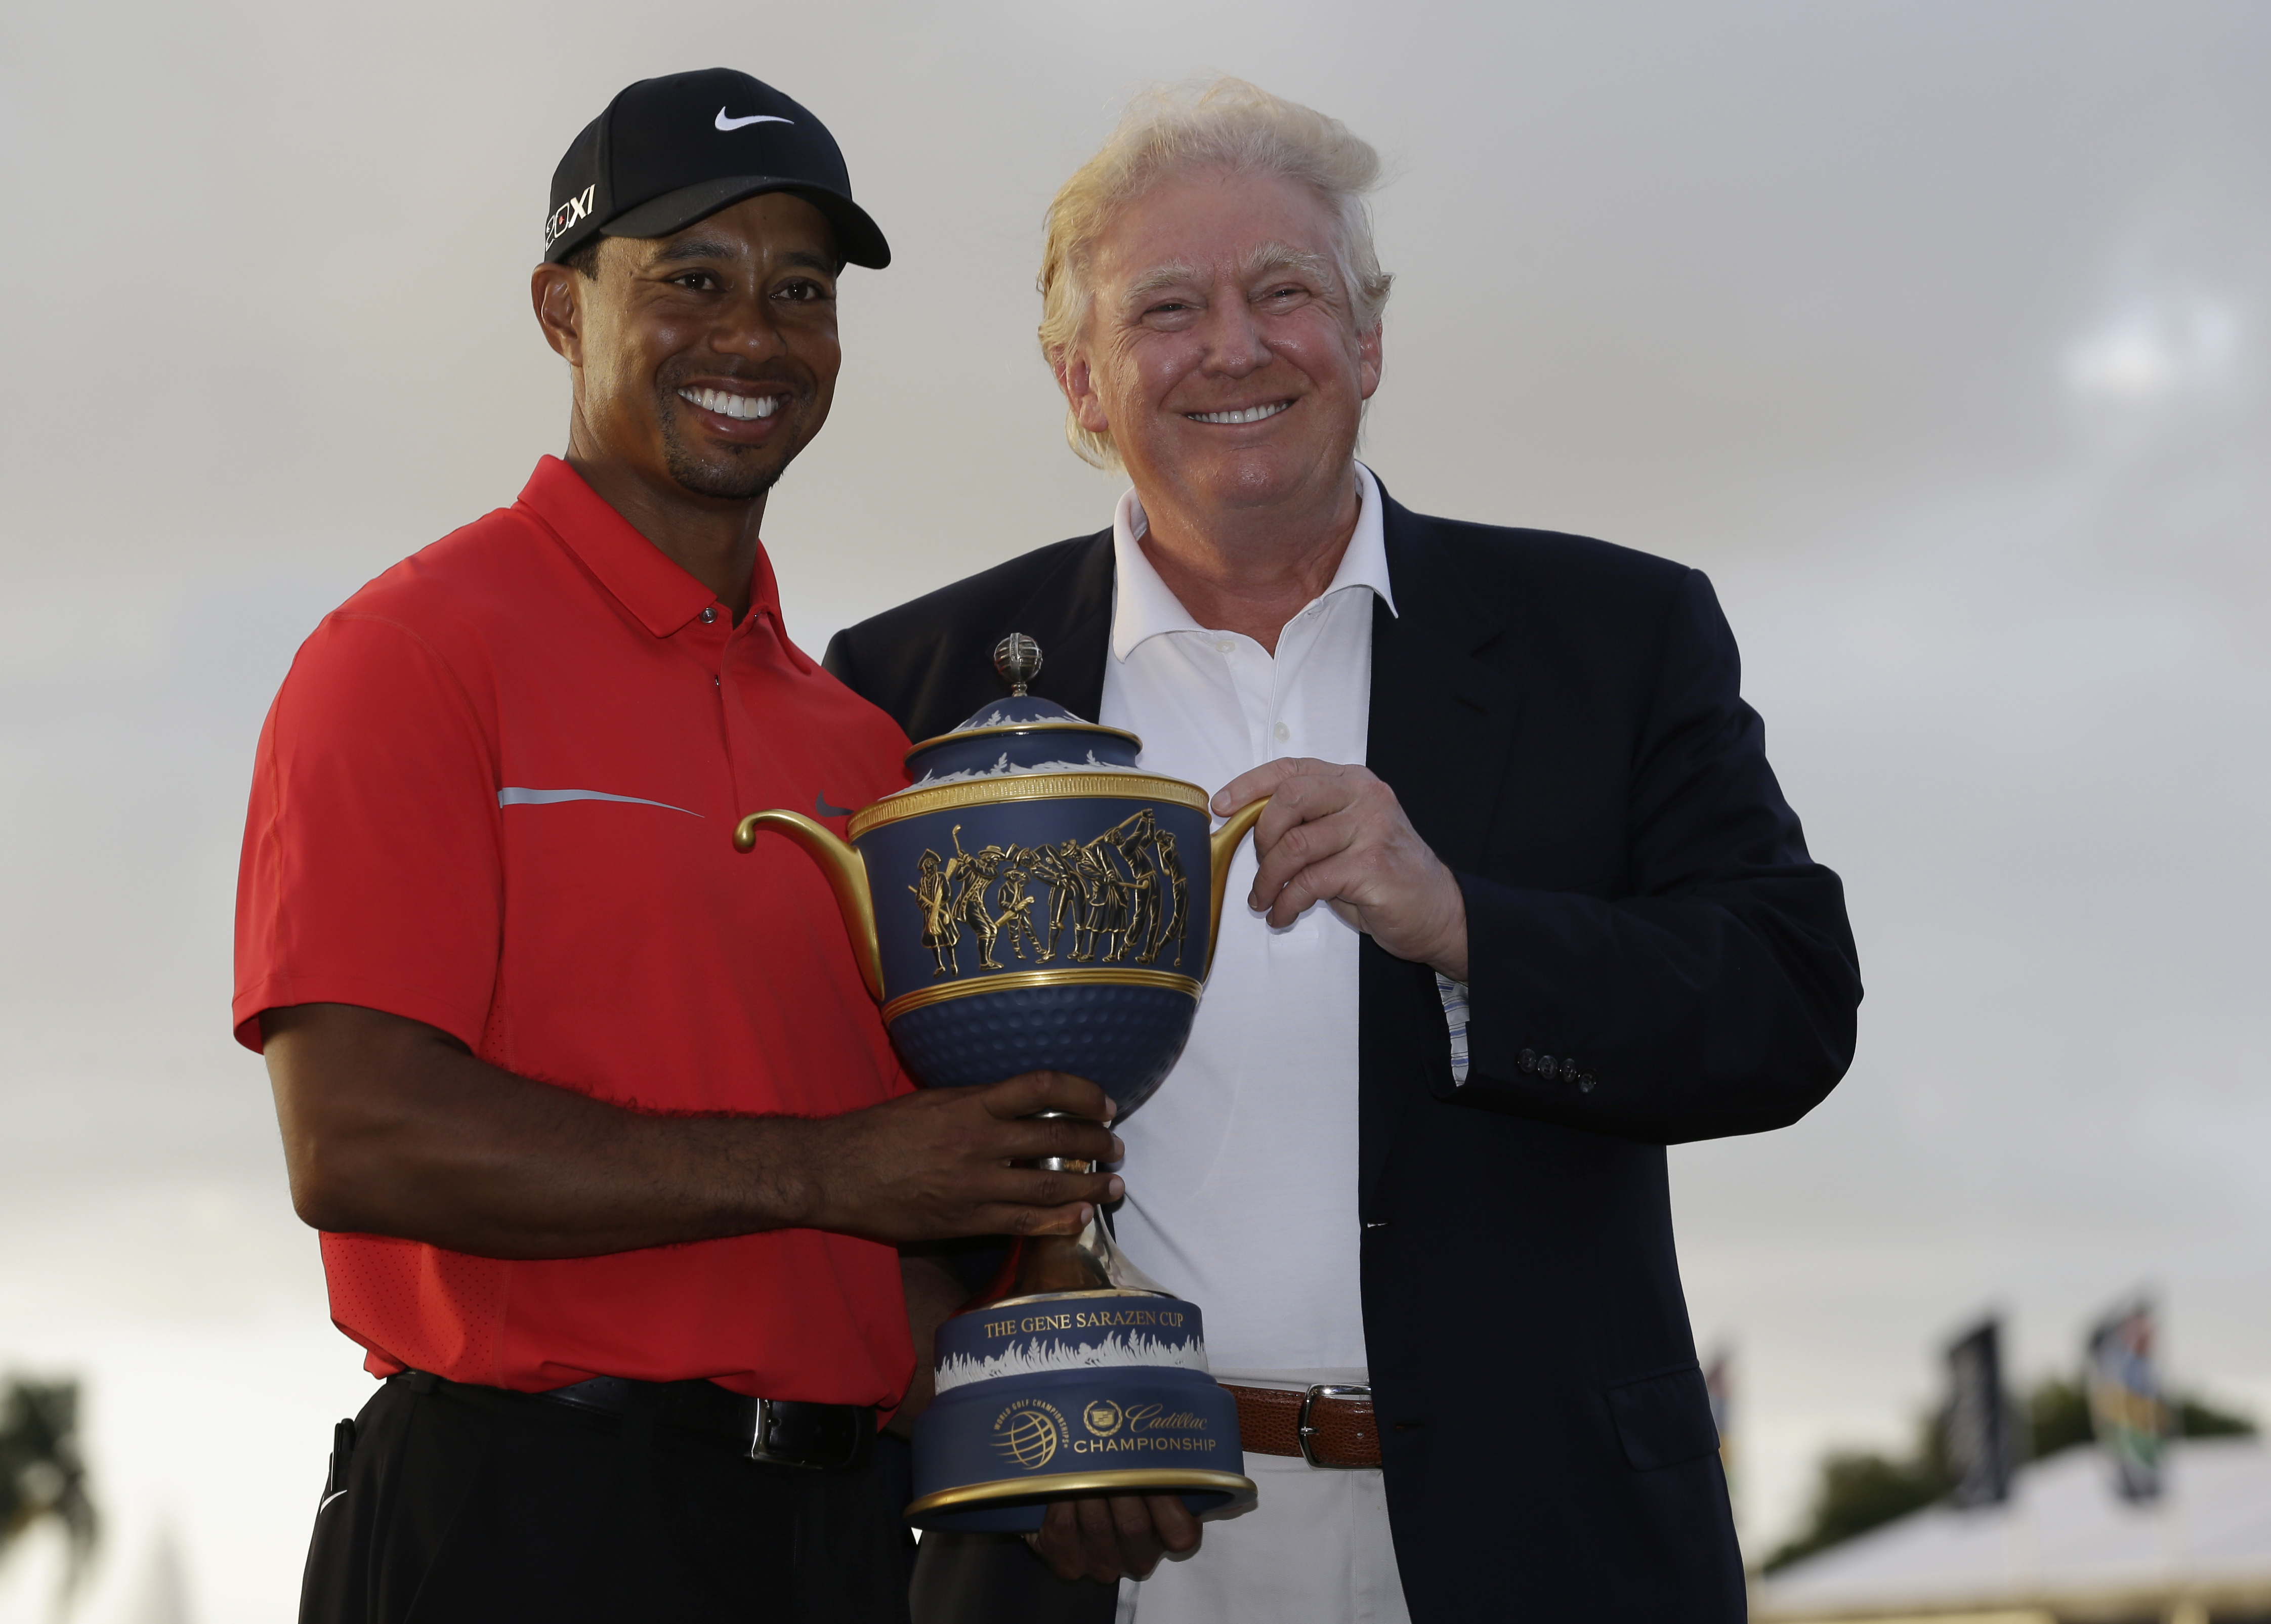 Tiger Woods stands with Donald Trump as he holds the Gene Serazen Cup for winning the Cadillac Championship golf tournament on March 10, 2013, in Doral, Fla.